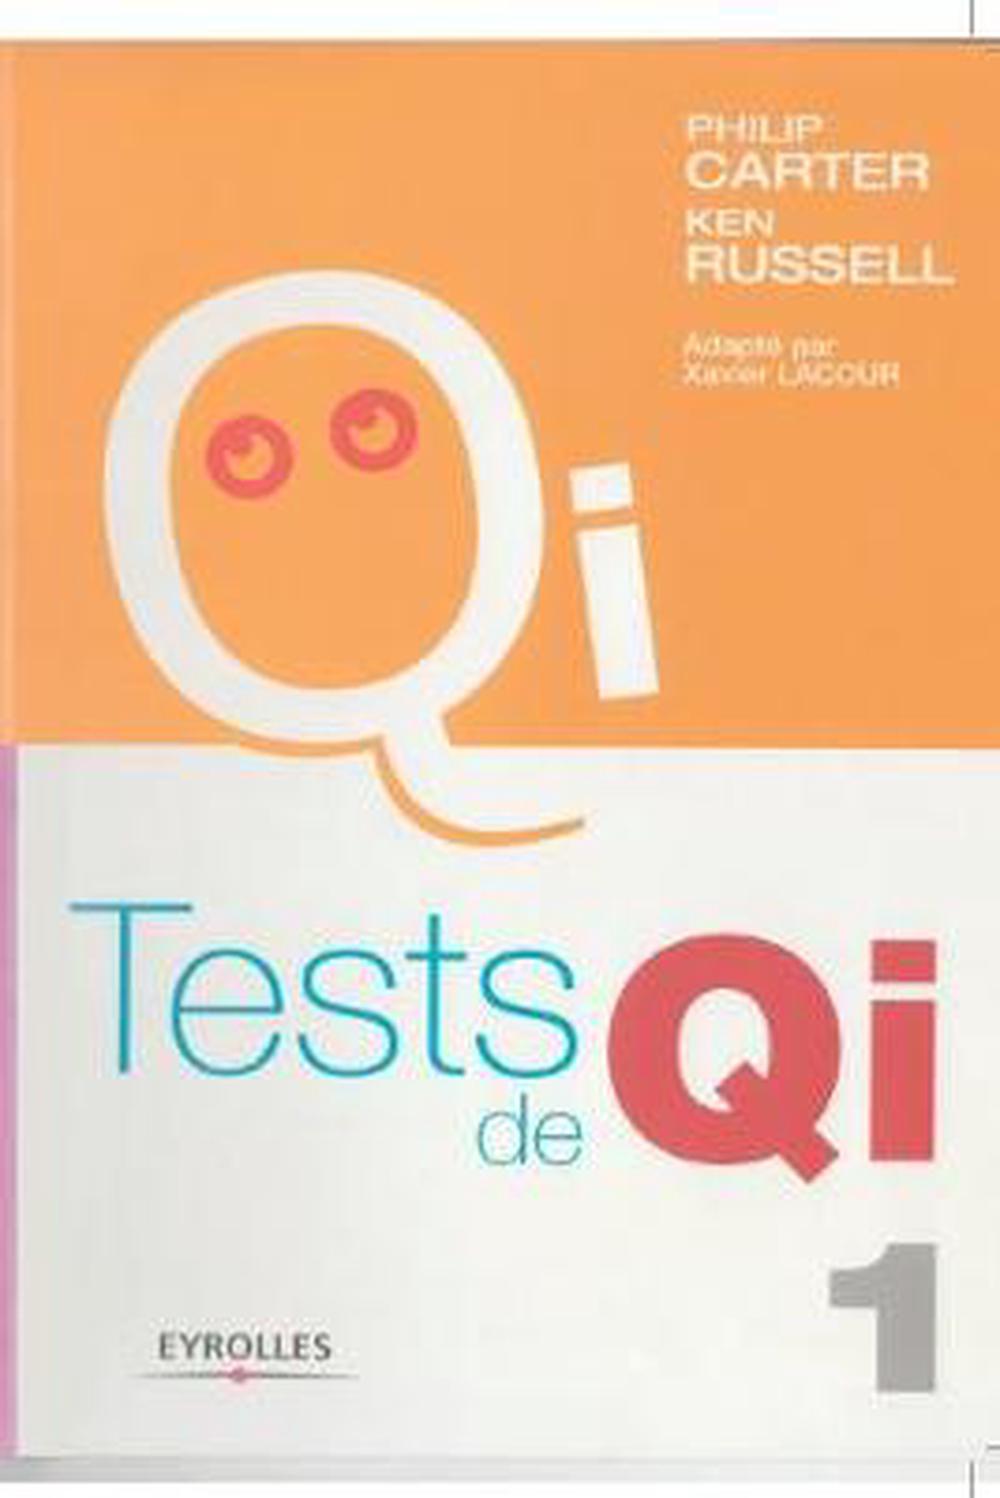 tests-de-qi-by-carter-philip-carter-french-paperback-book-free-shipping-ebay